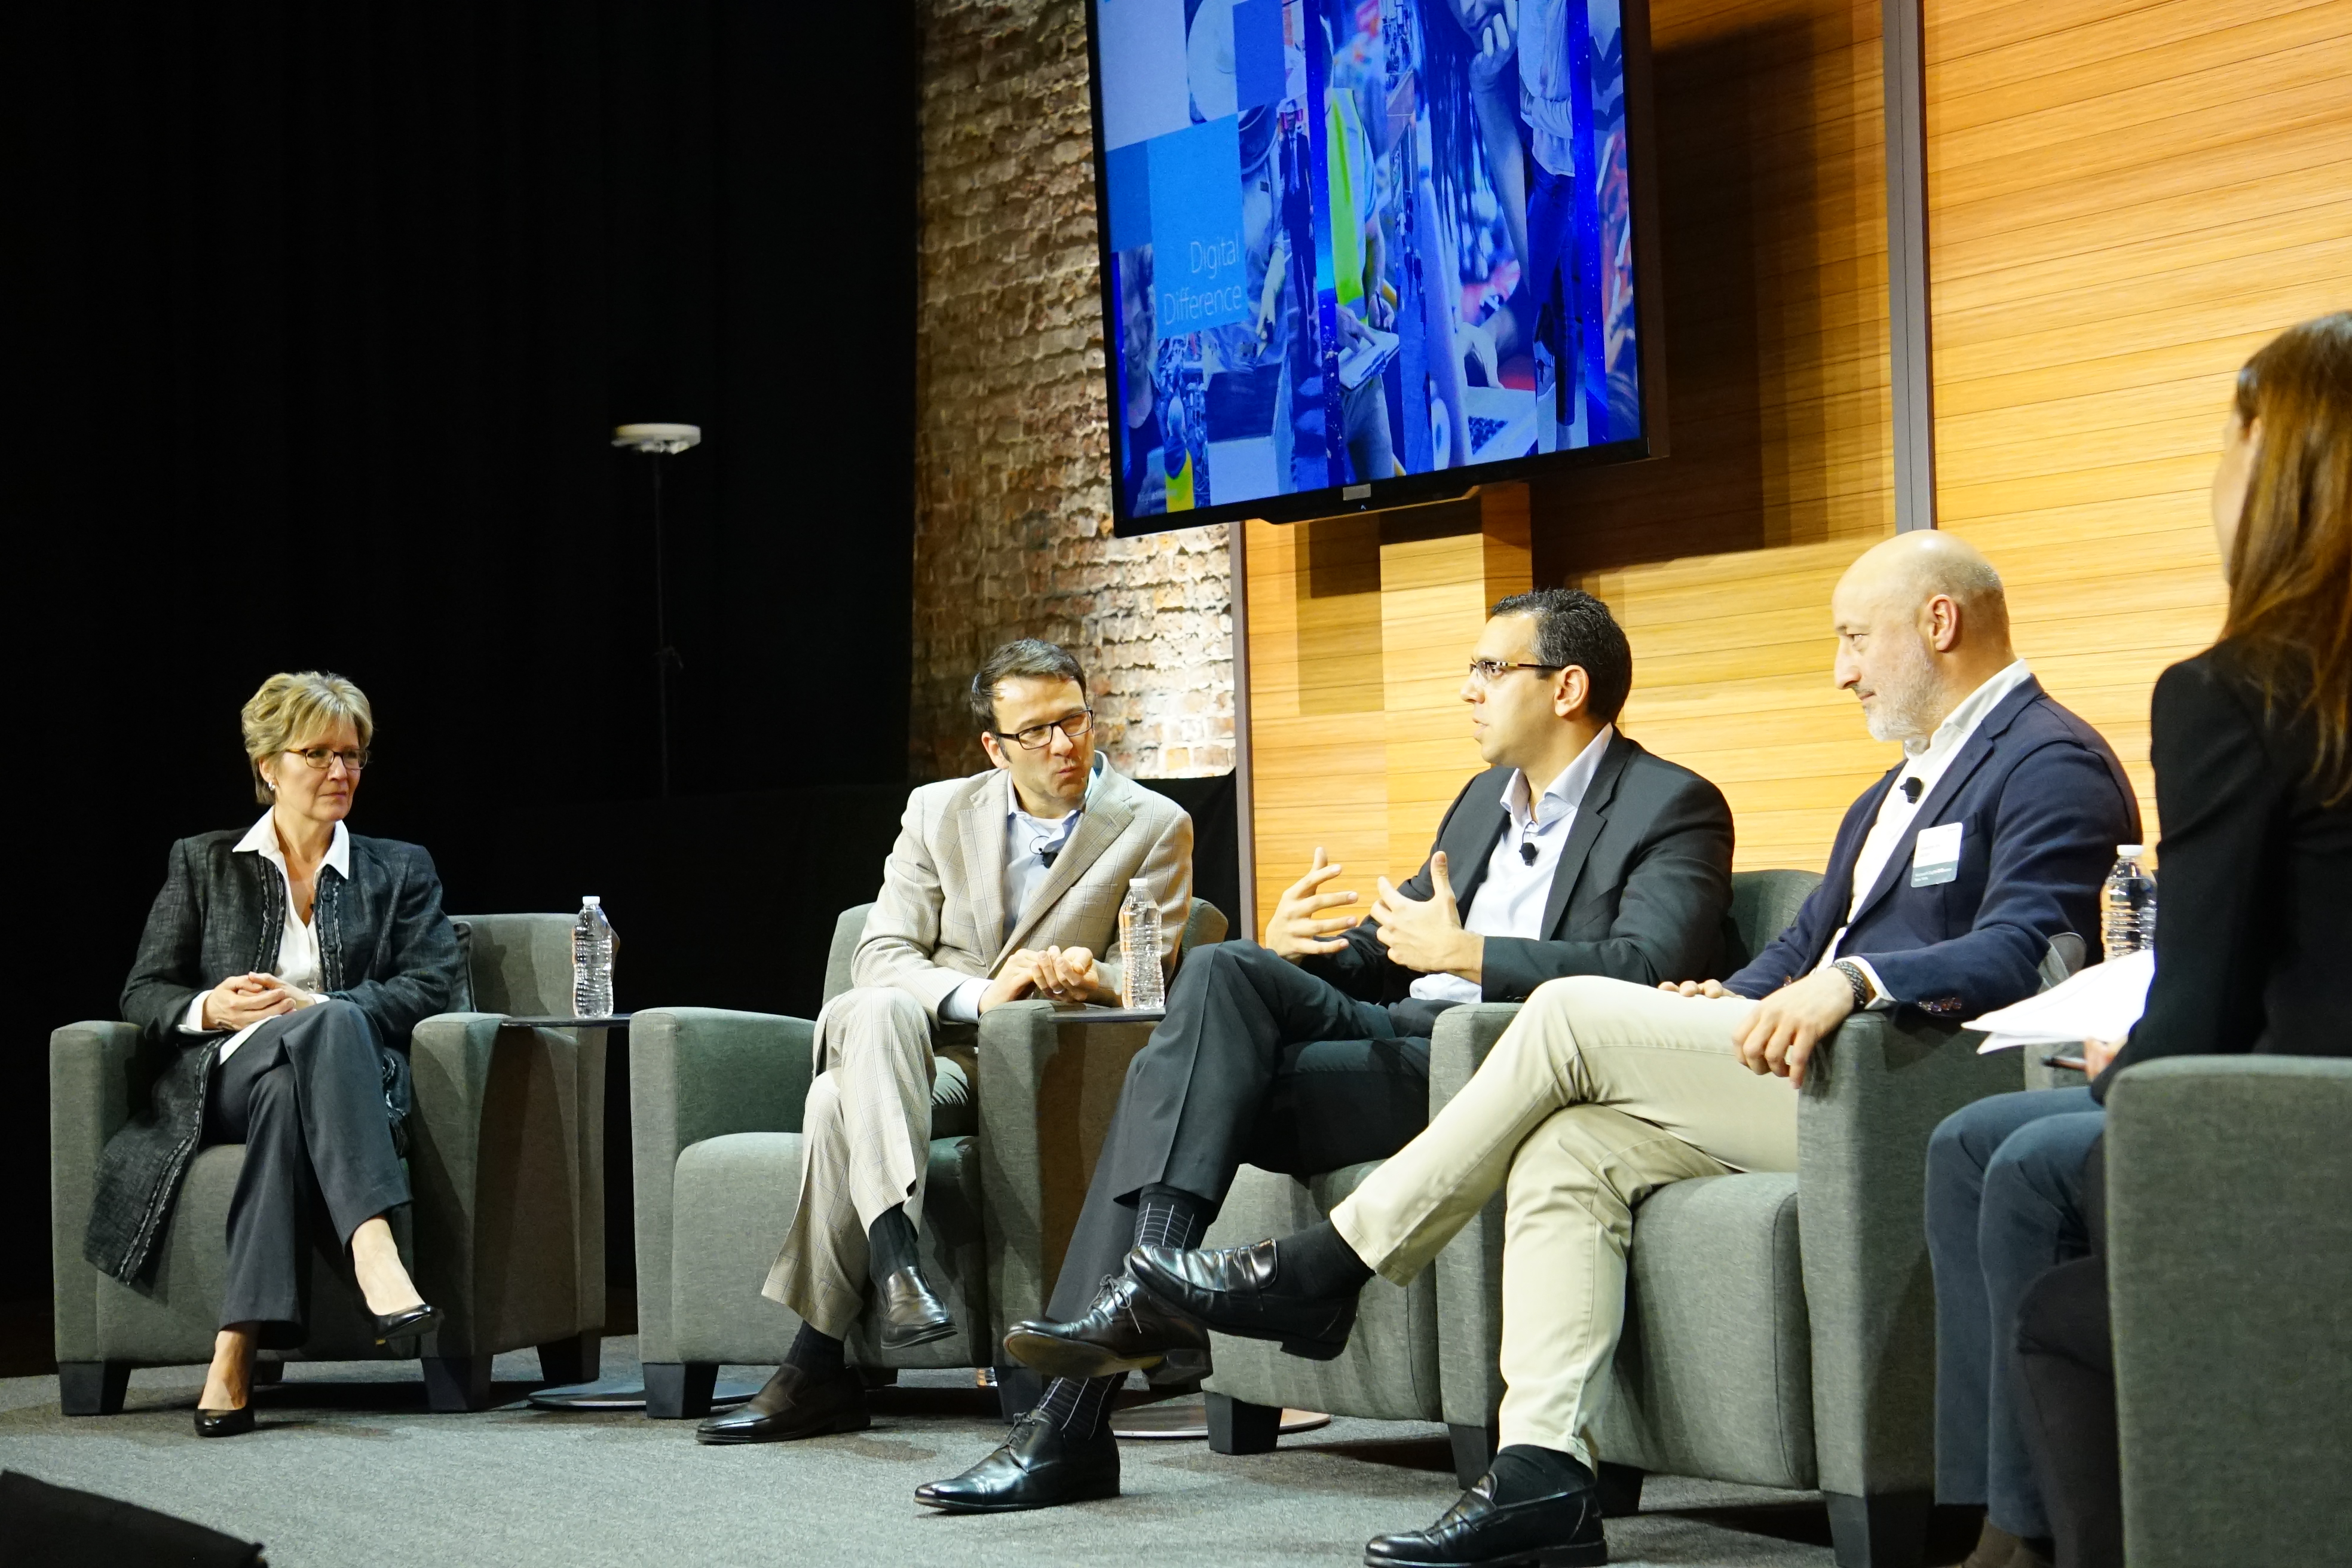 Microsoft's Digital Difference in New York City with Abbie Lundberg, Judson Althoff, and execs from La Liga